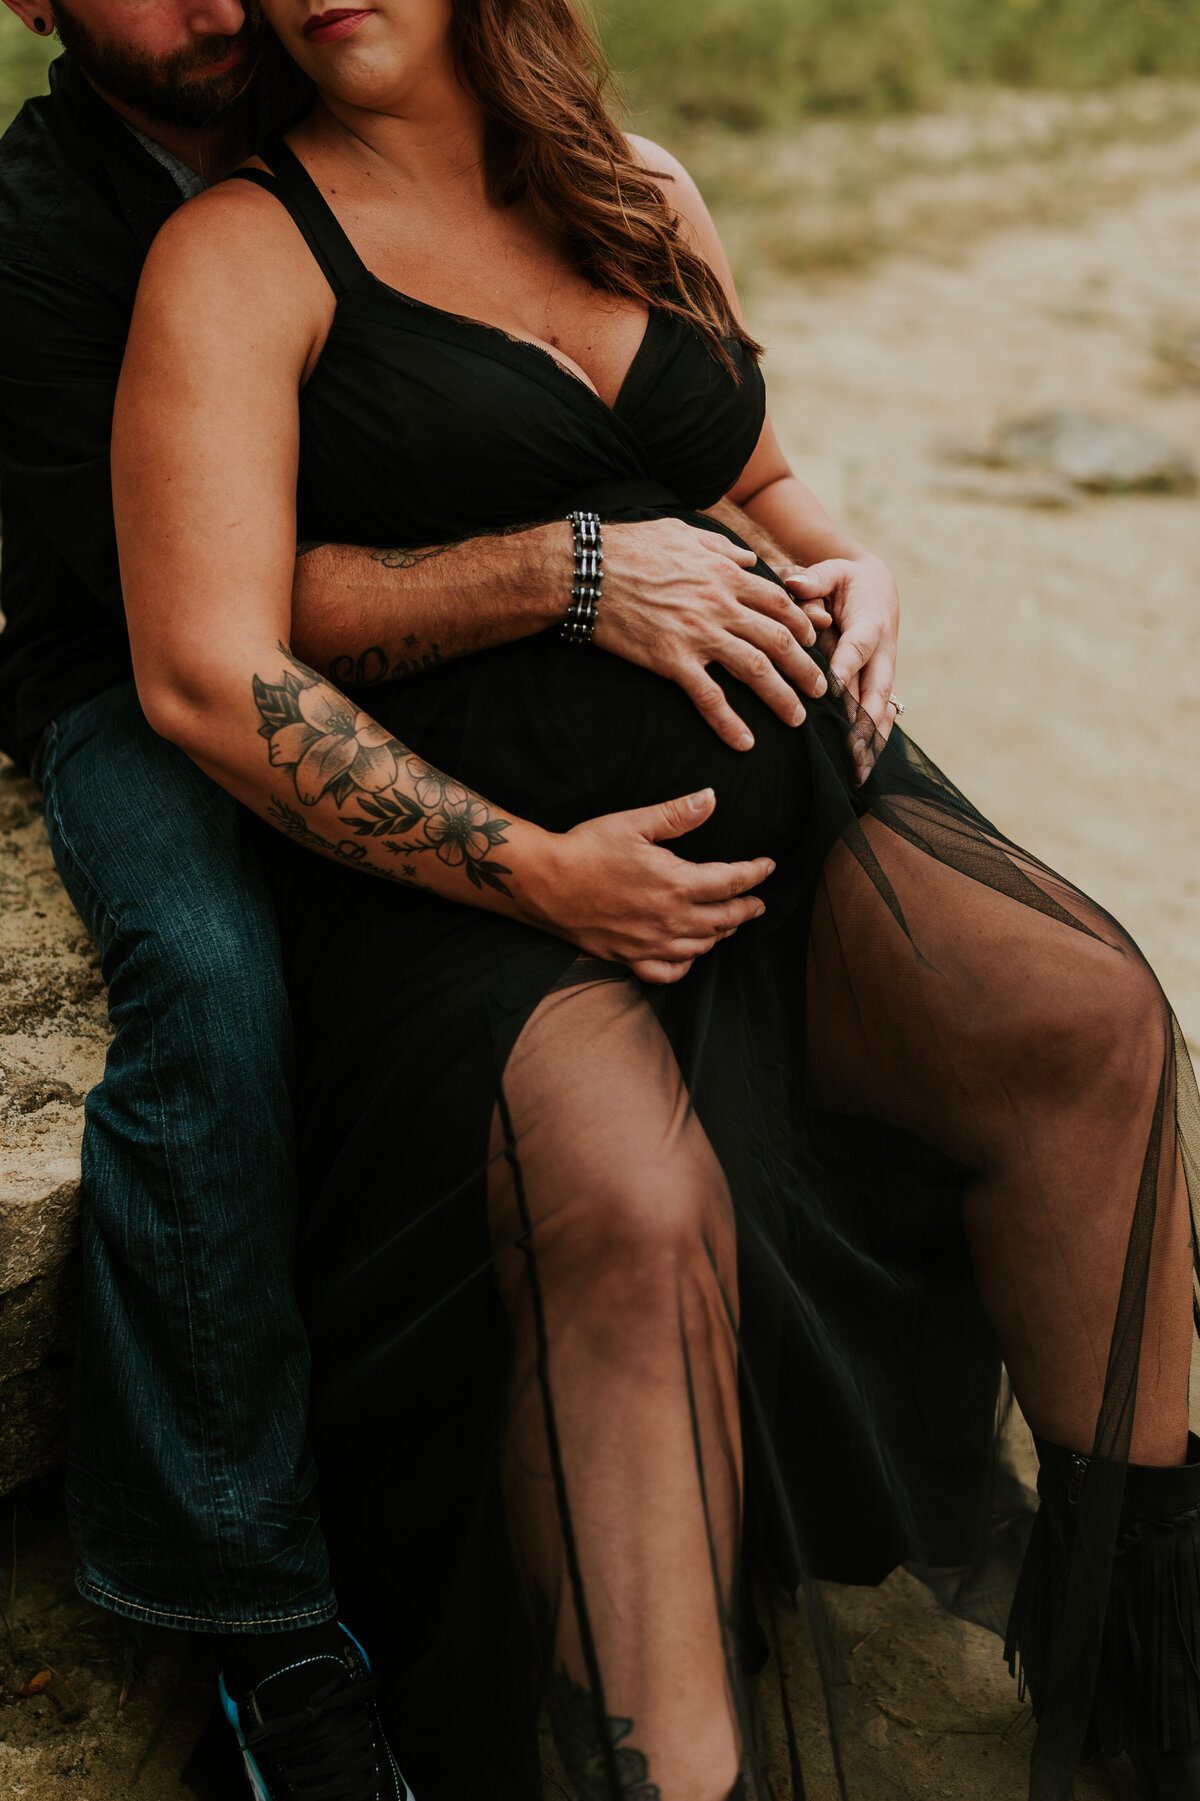 Celebrate lakeside love with maternity portraits by the waters in Twin Cities. Shannon Kathleen Photography captures the serene beauty of your maternal journey.